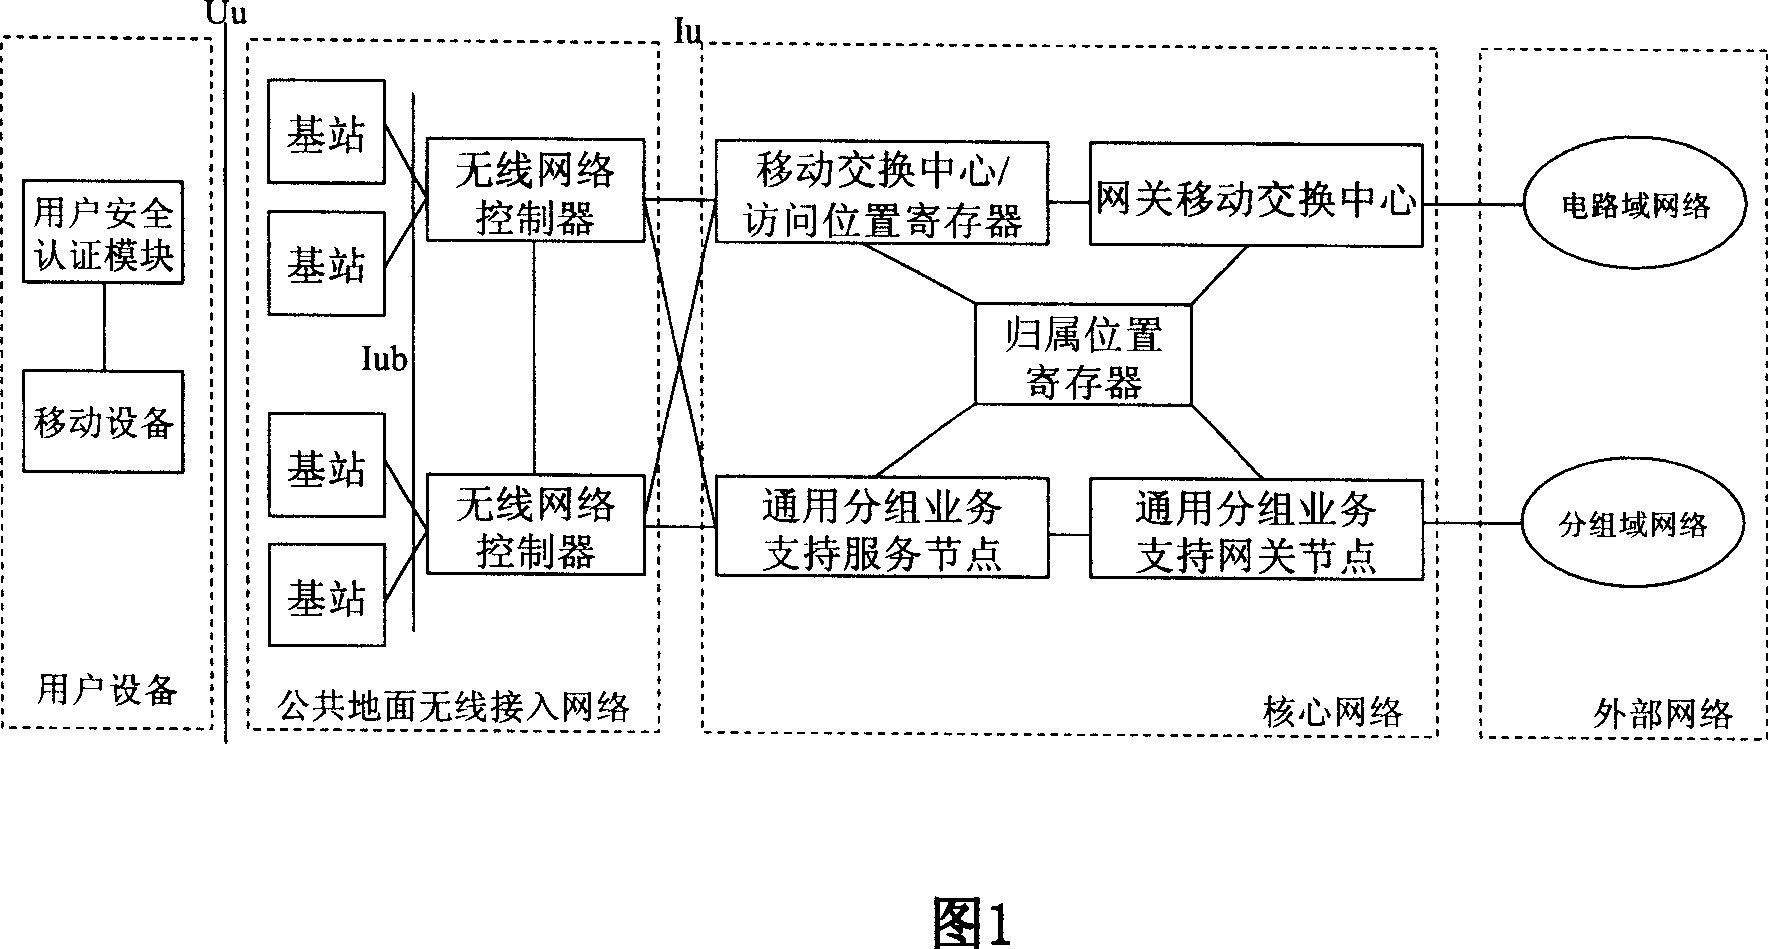 Wireless resource management system and switch controlling method based on it